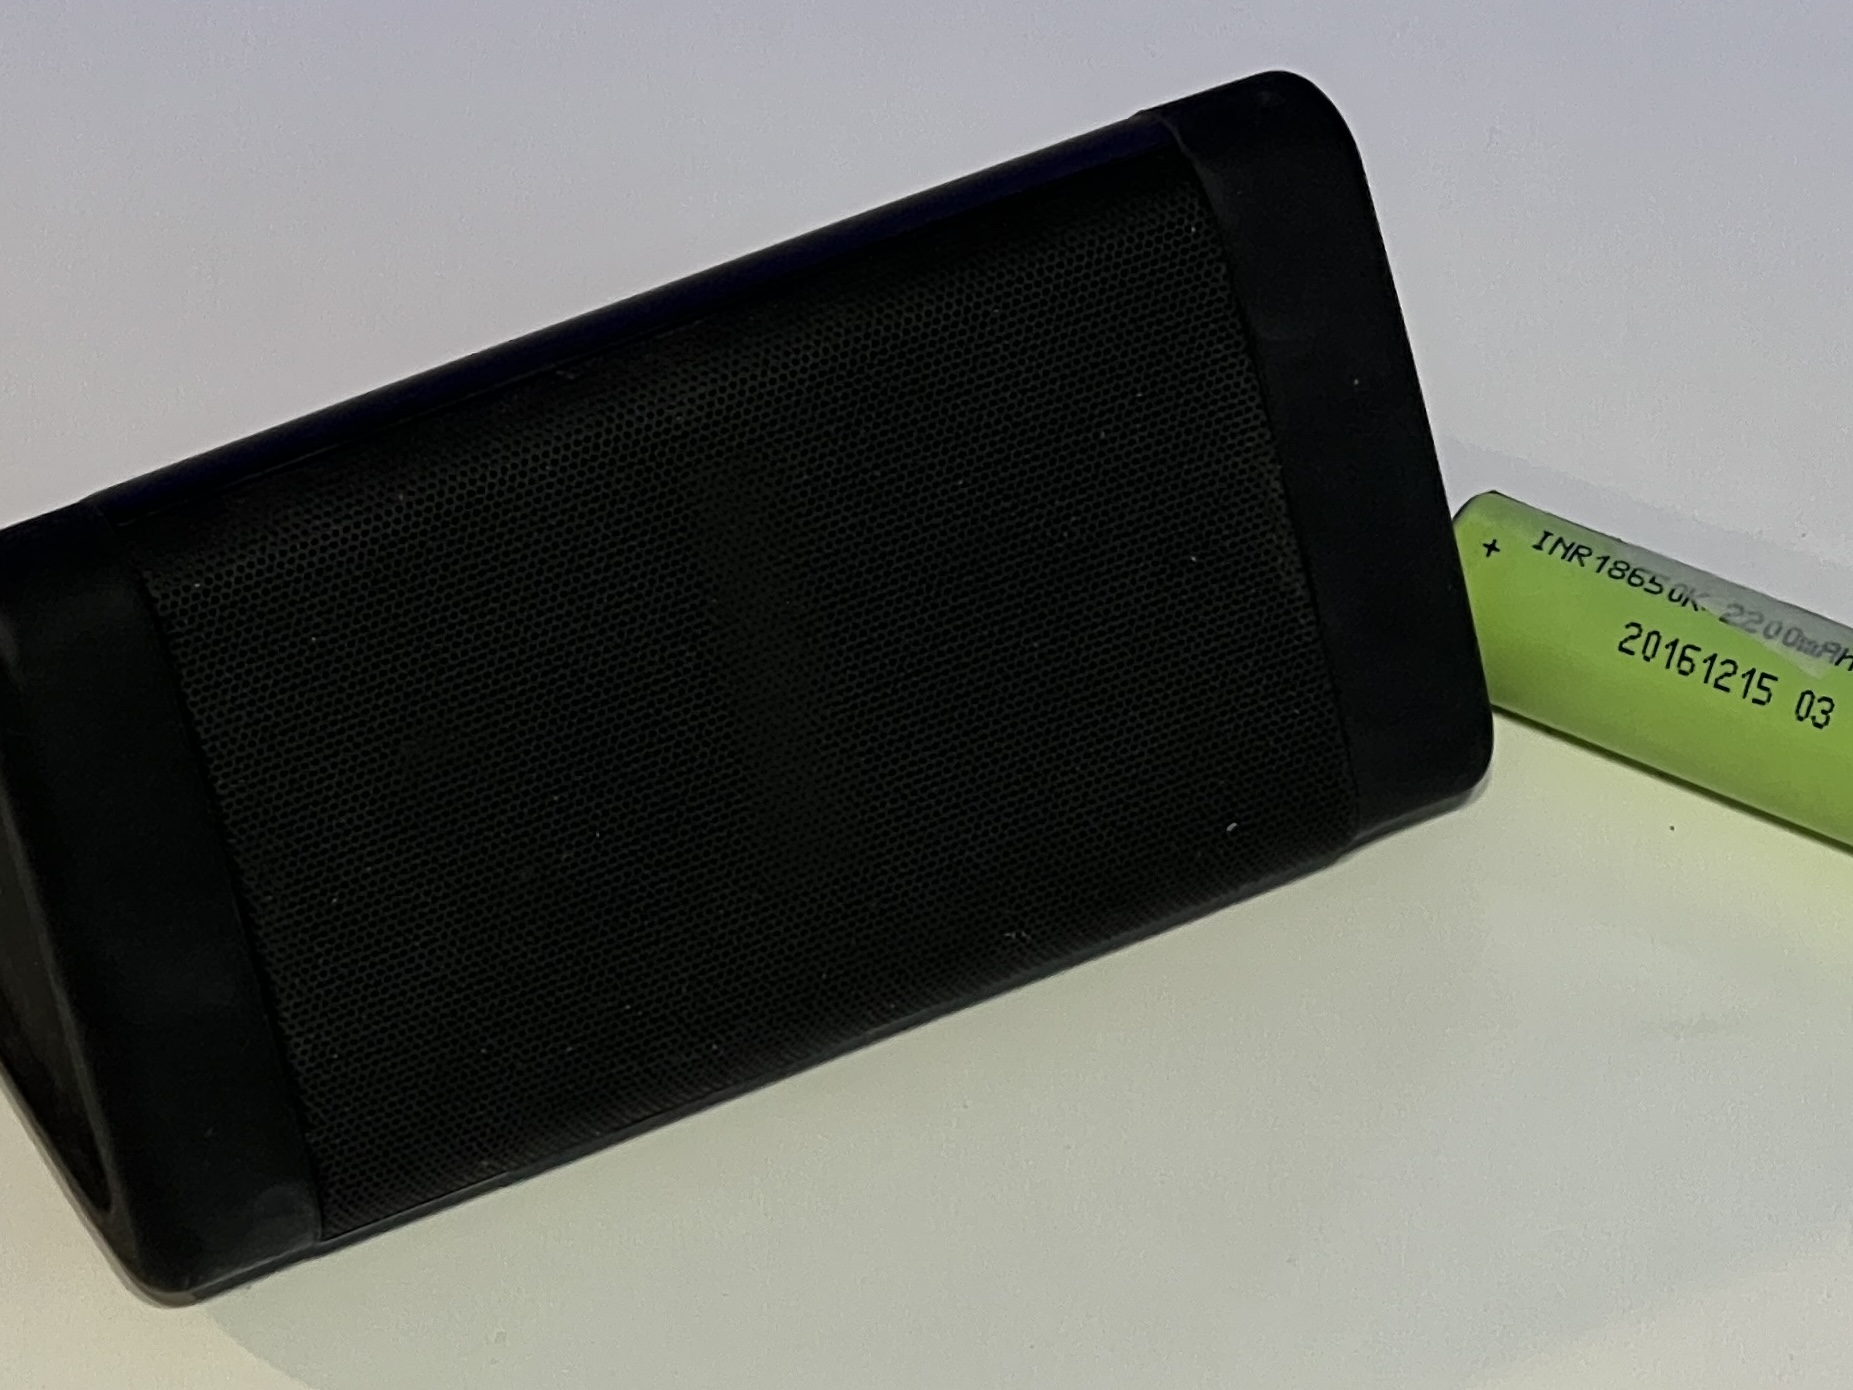 OontZ Bluetooth Speaker and Old 18650 Battery